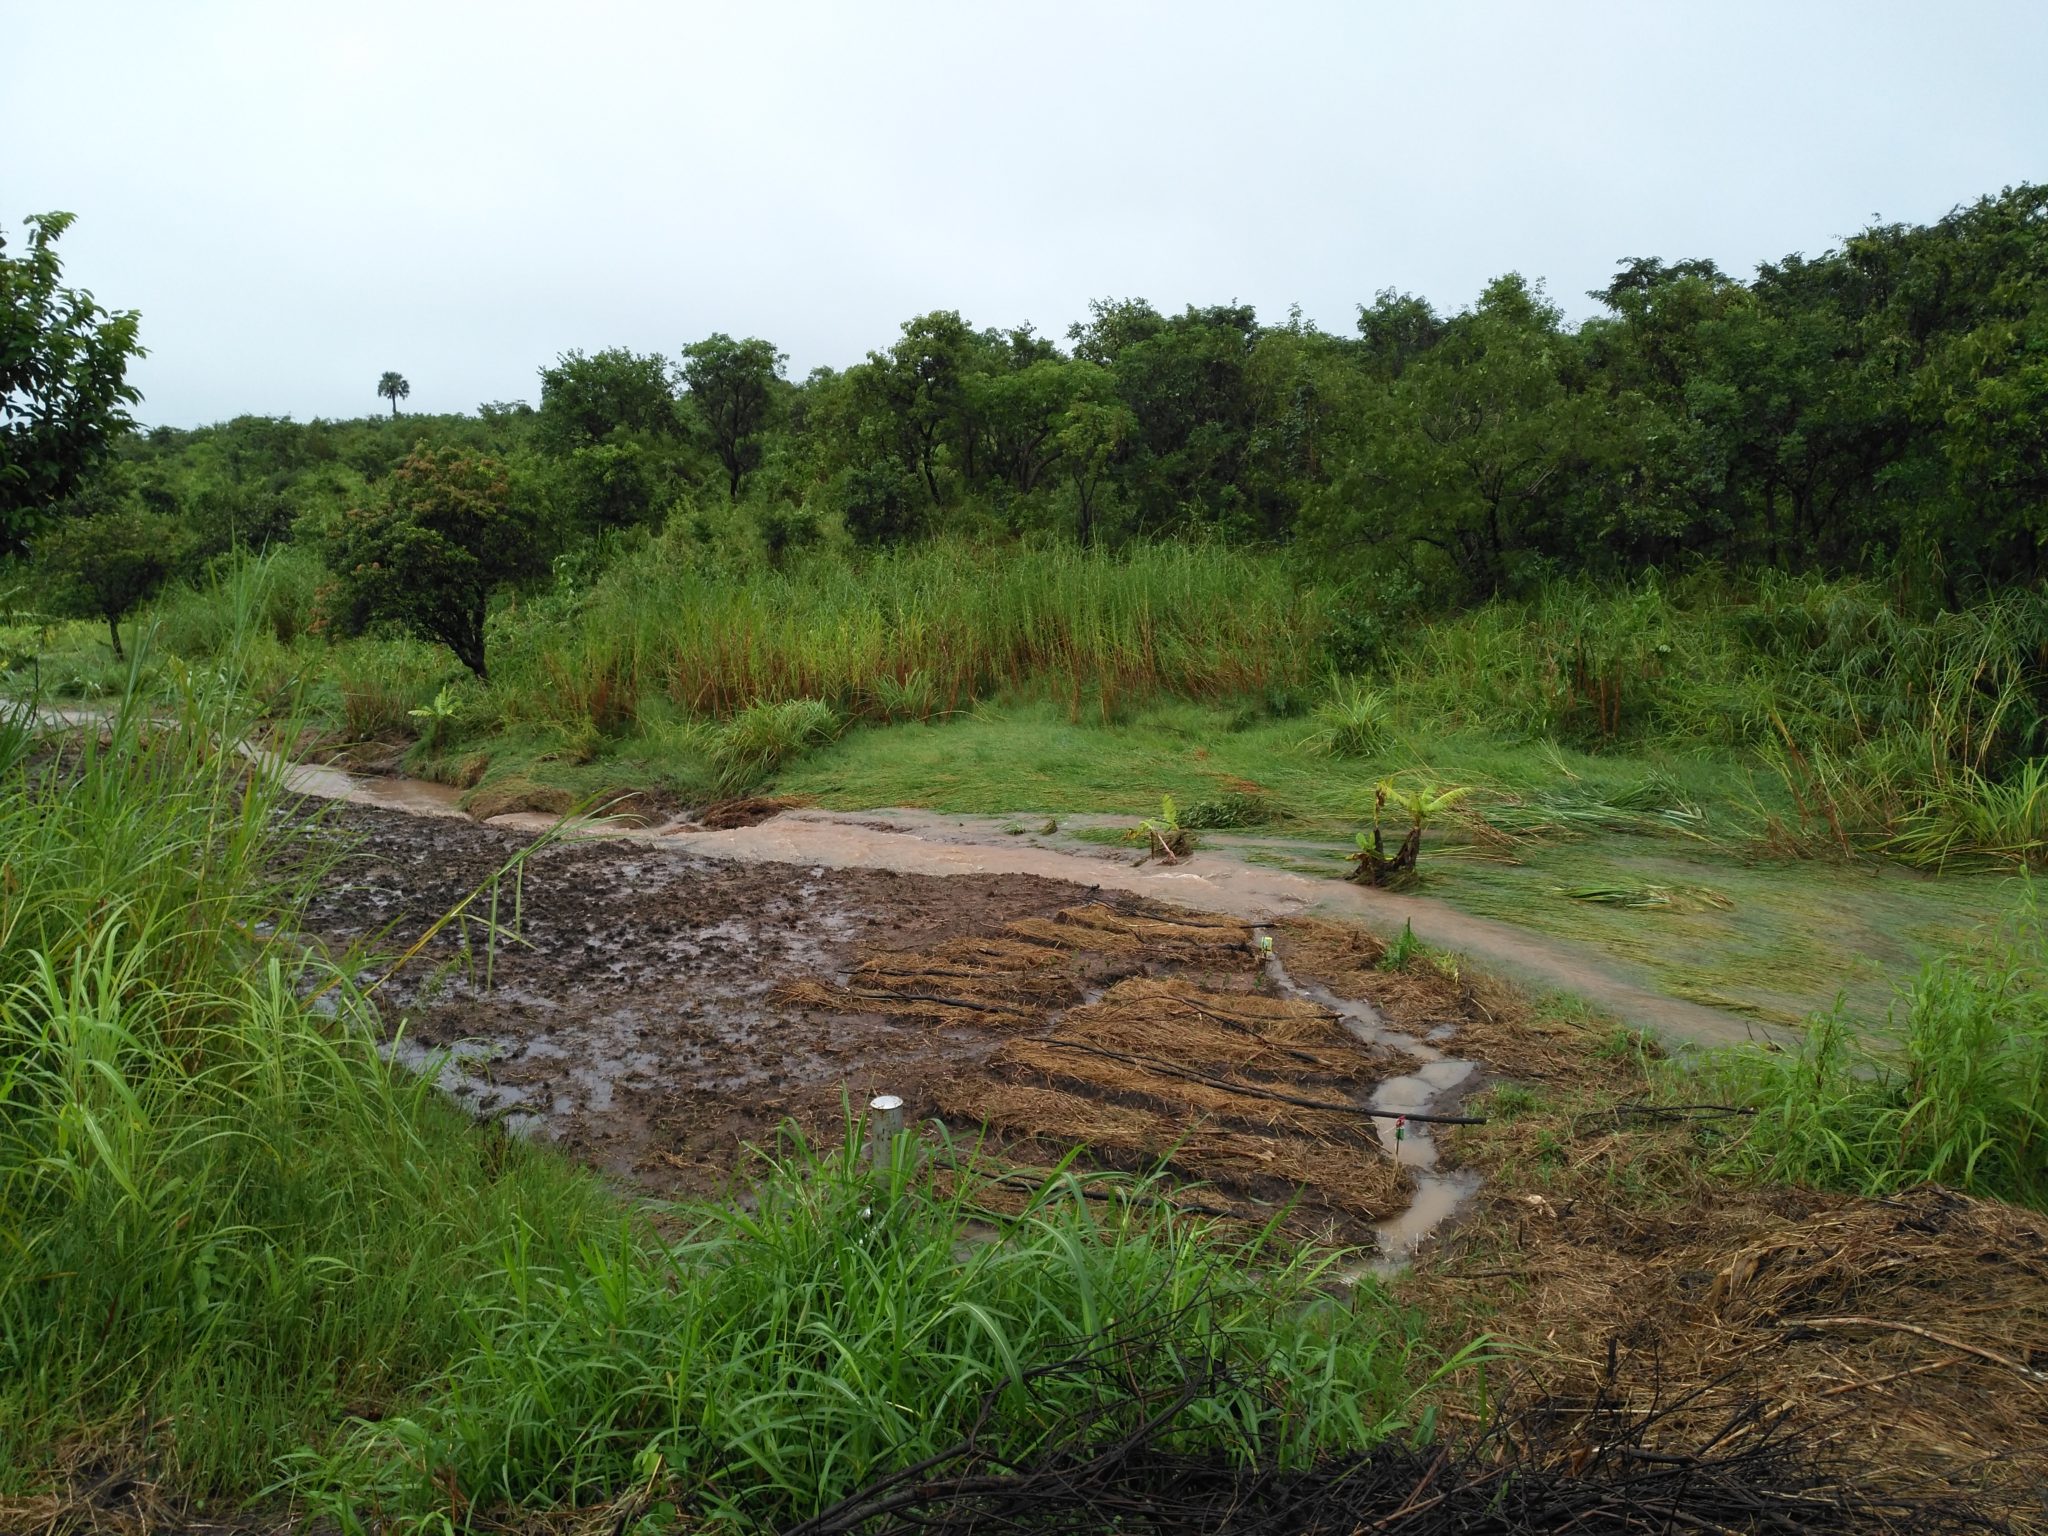 A wet field after Cyclone Idai flooded it